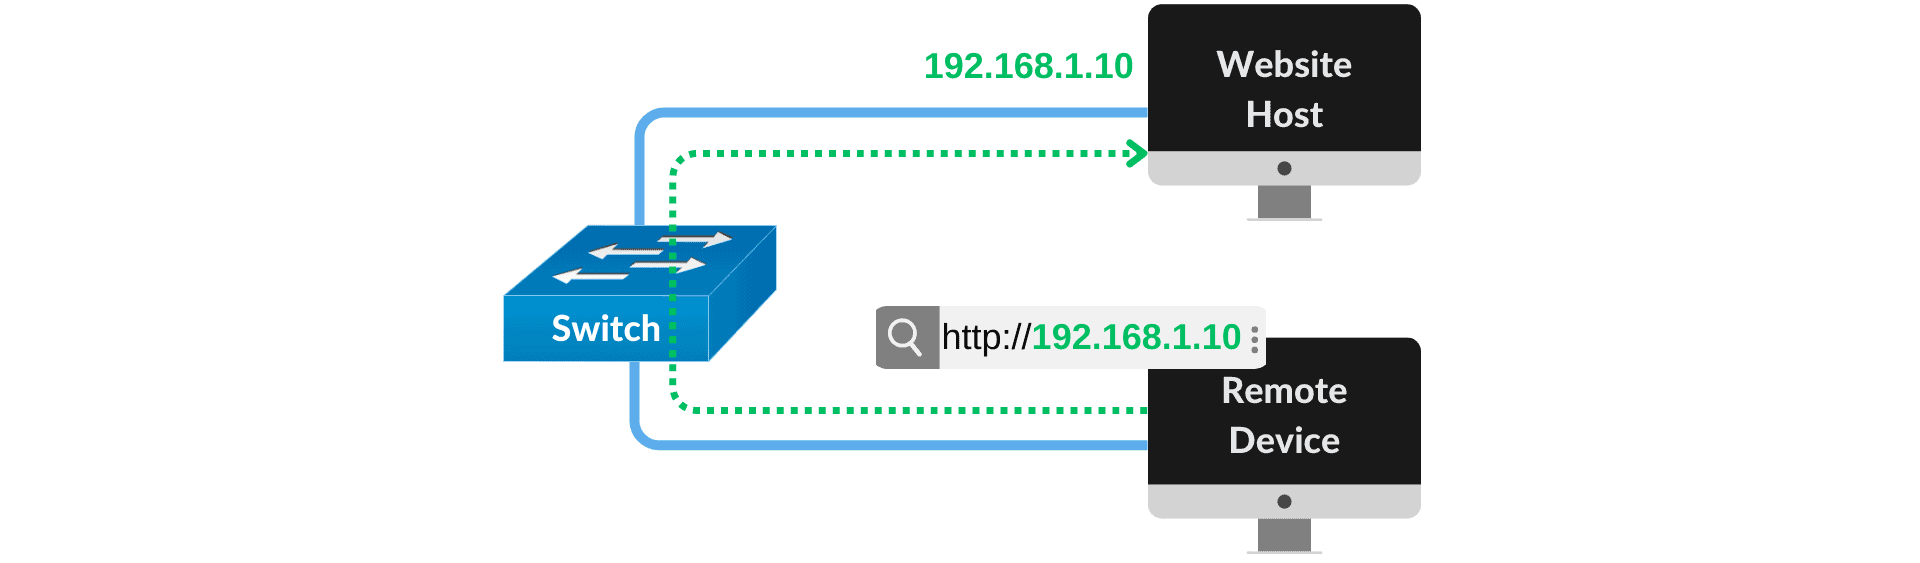 Accessing the host directly by IP